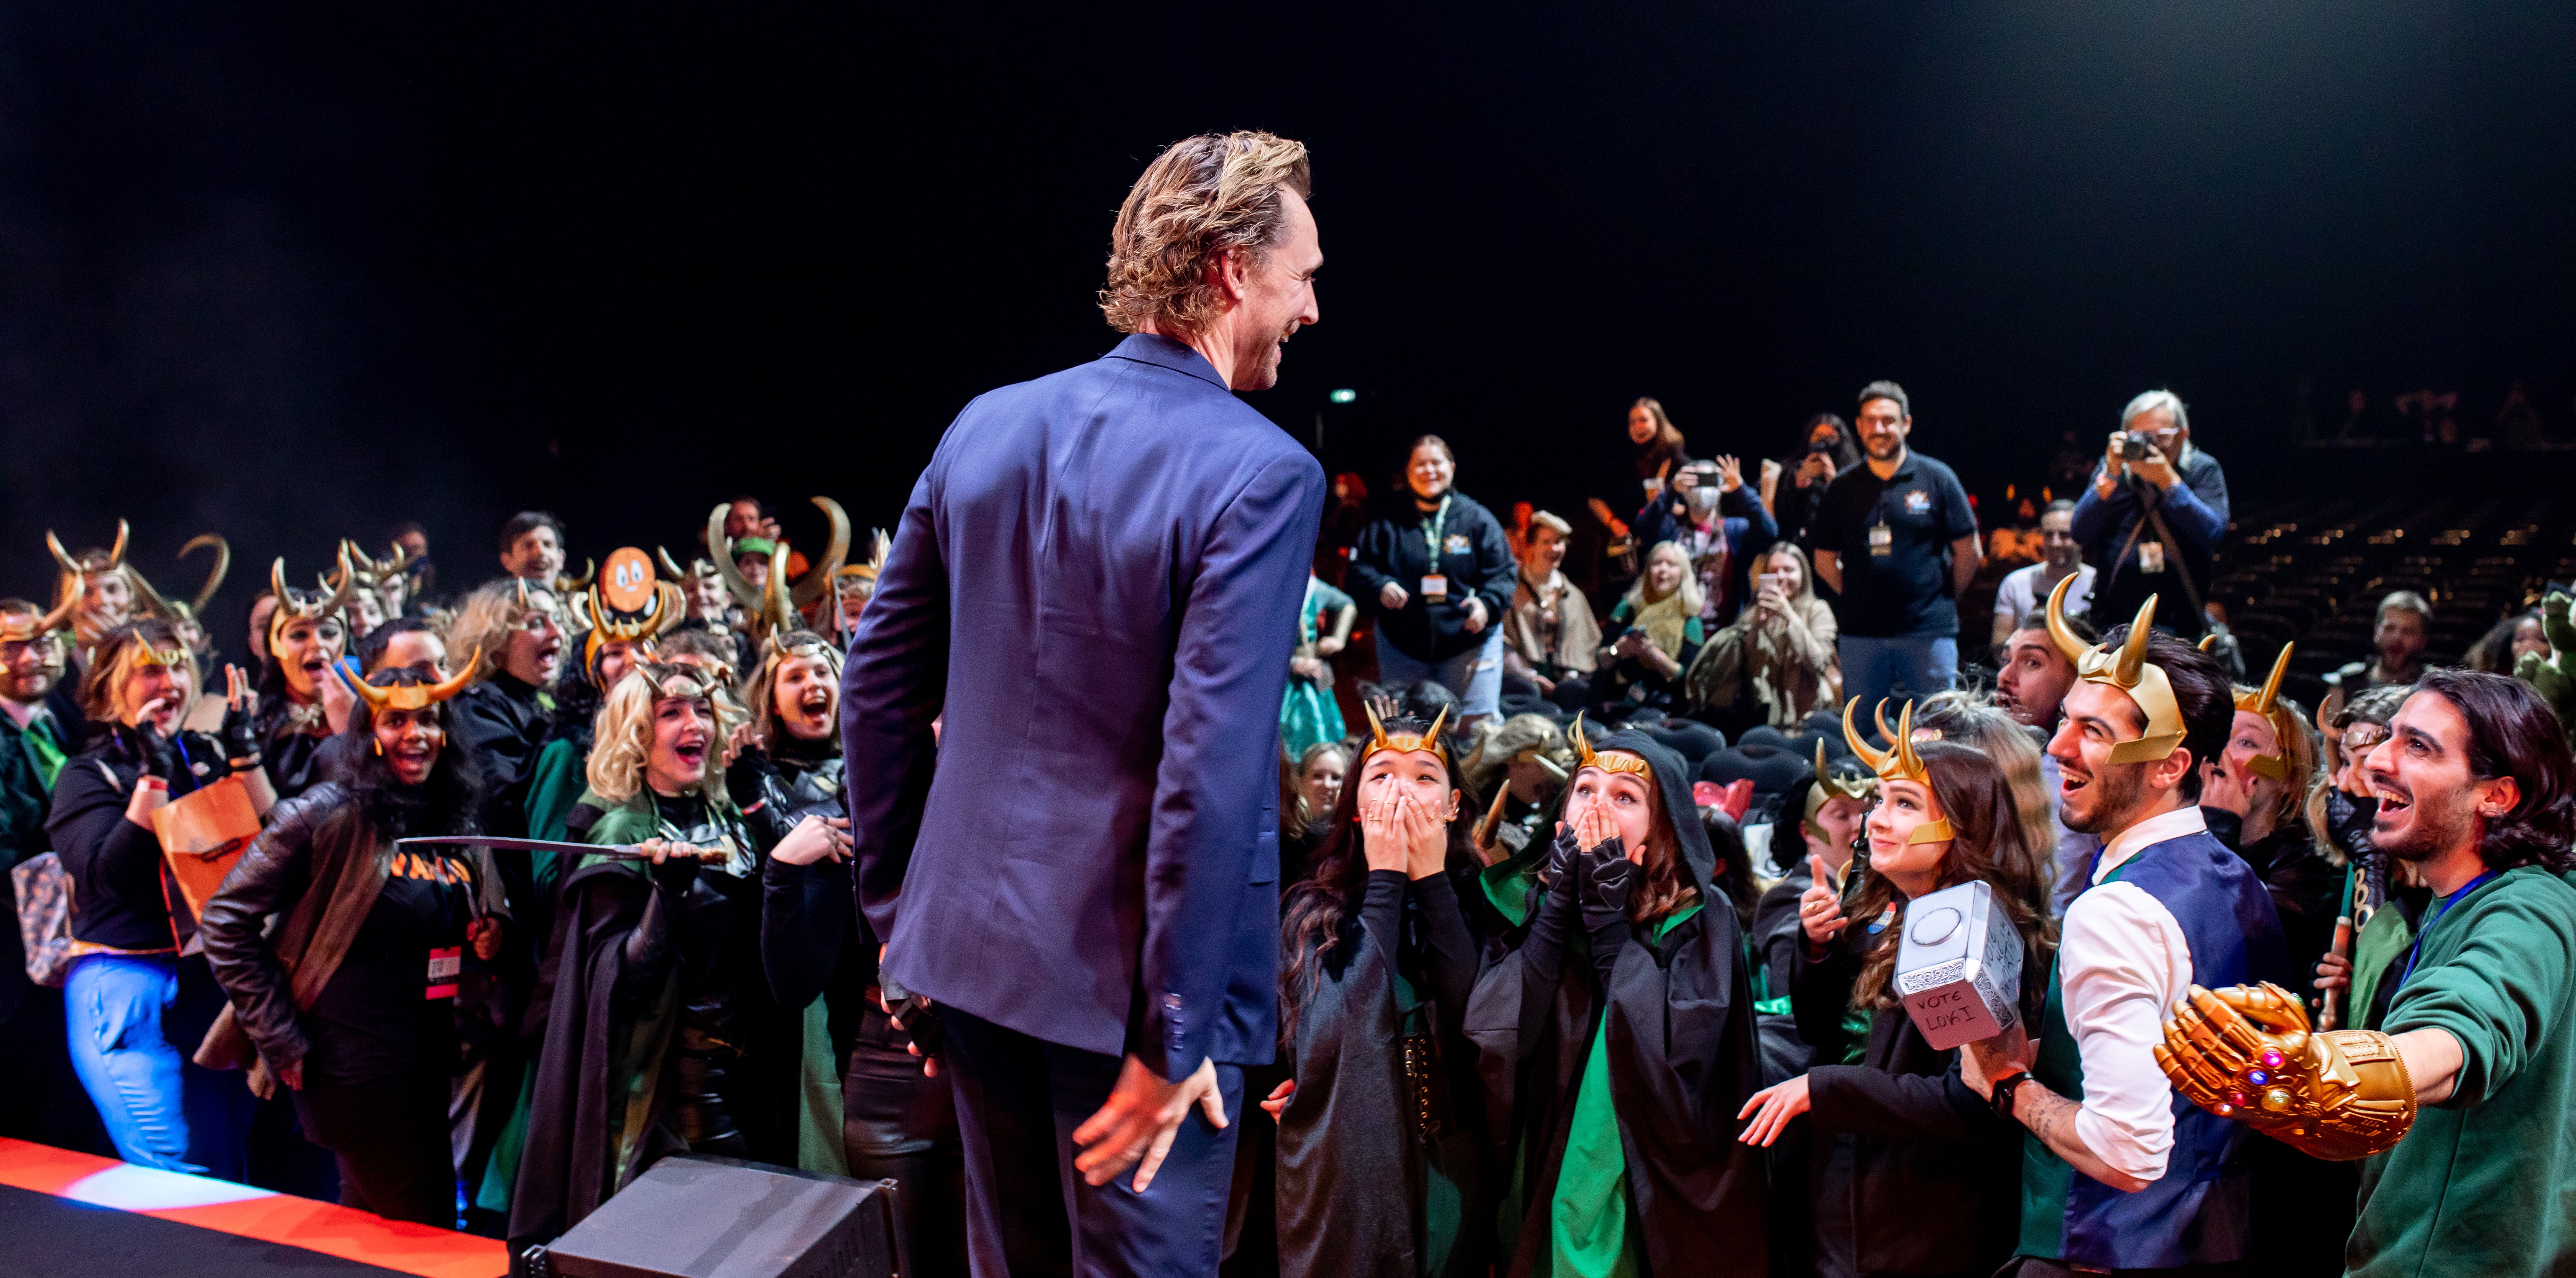 Tom surprises fans at MCM London (Image courtesy MCM London & Cosplay Central)